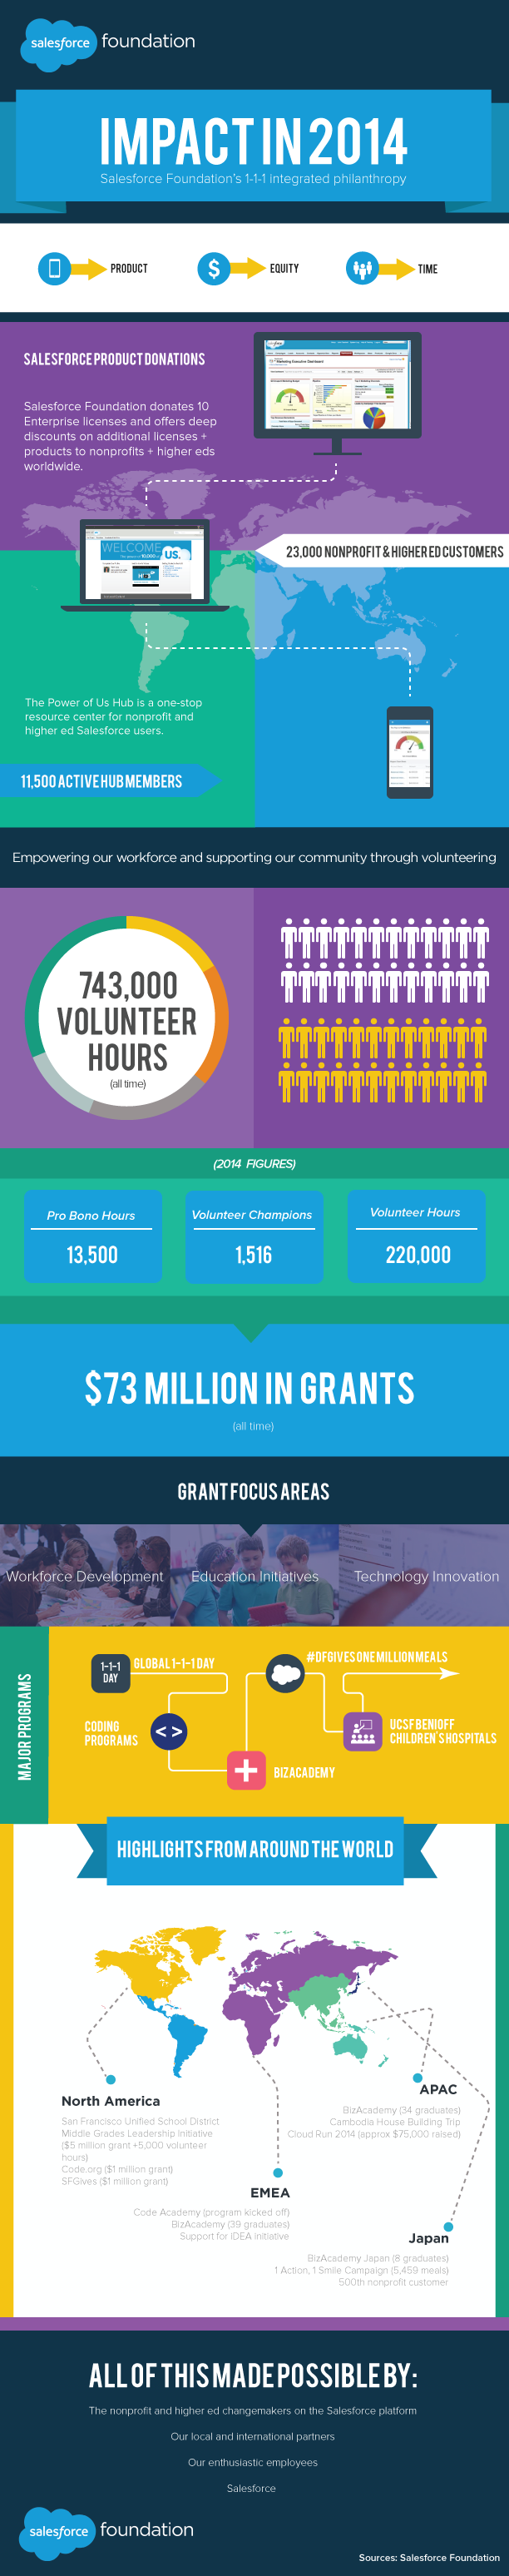 Salesforce-Foundation---Impact-in-2014